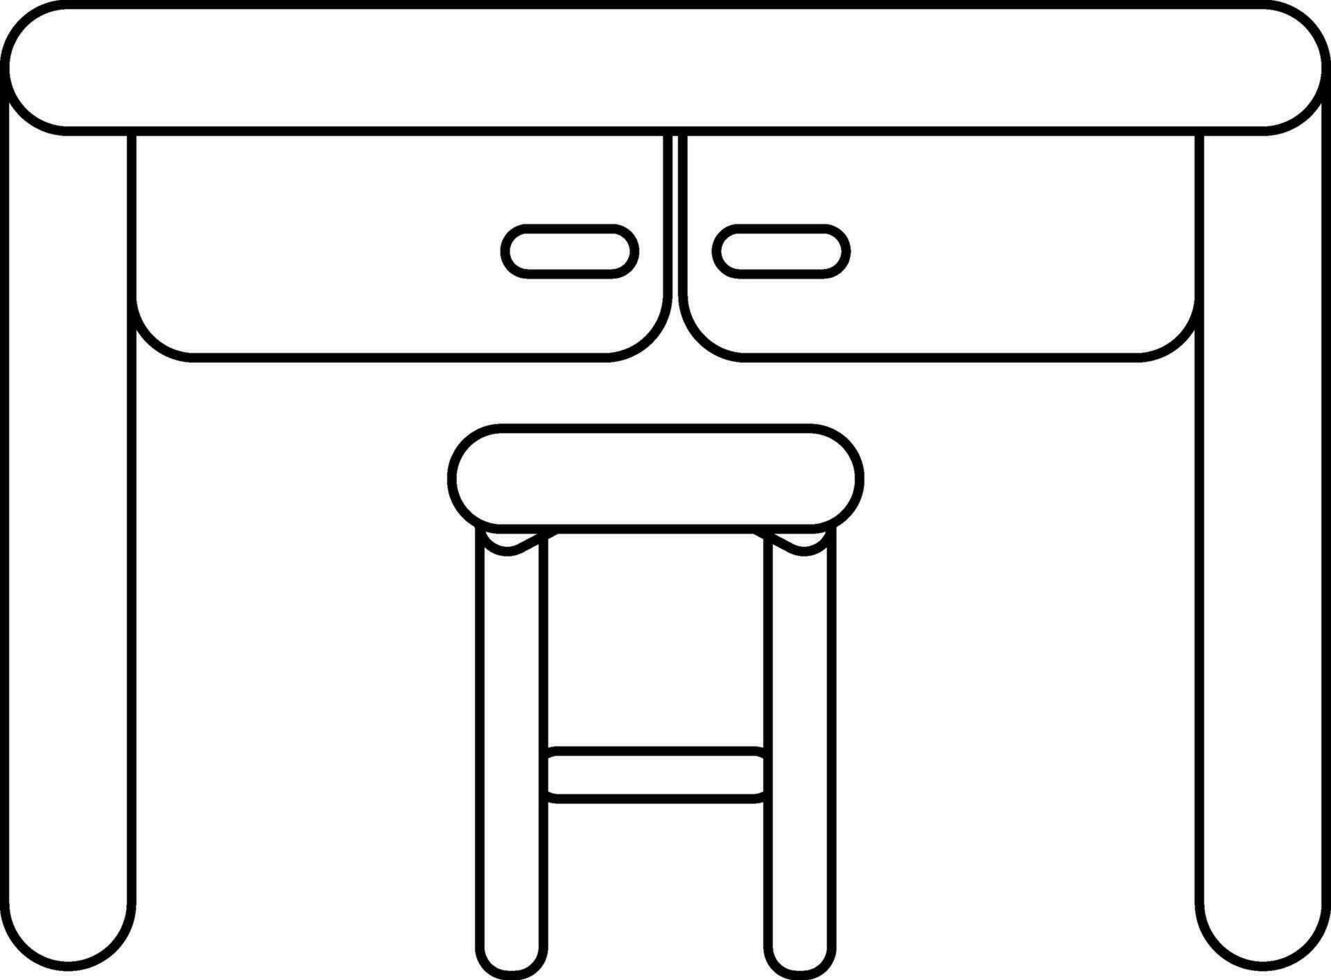 Table icon with stool in stroke style for furniture concept. vector